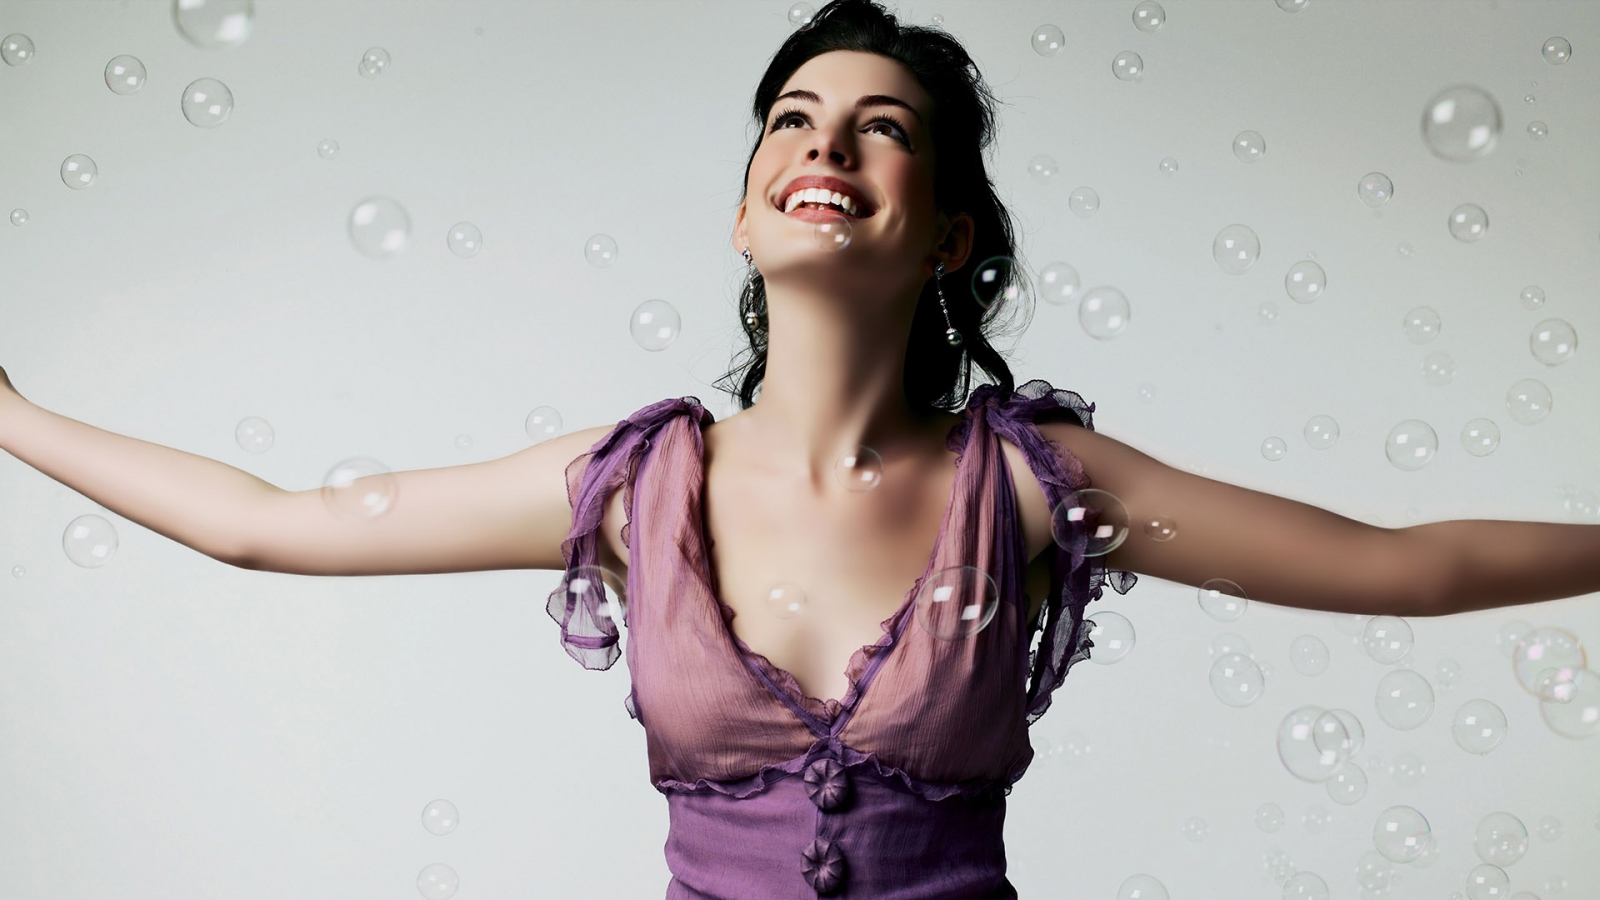 Anne Hathaway Bubbles for 1600 x 900 HDTV resolution